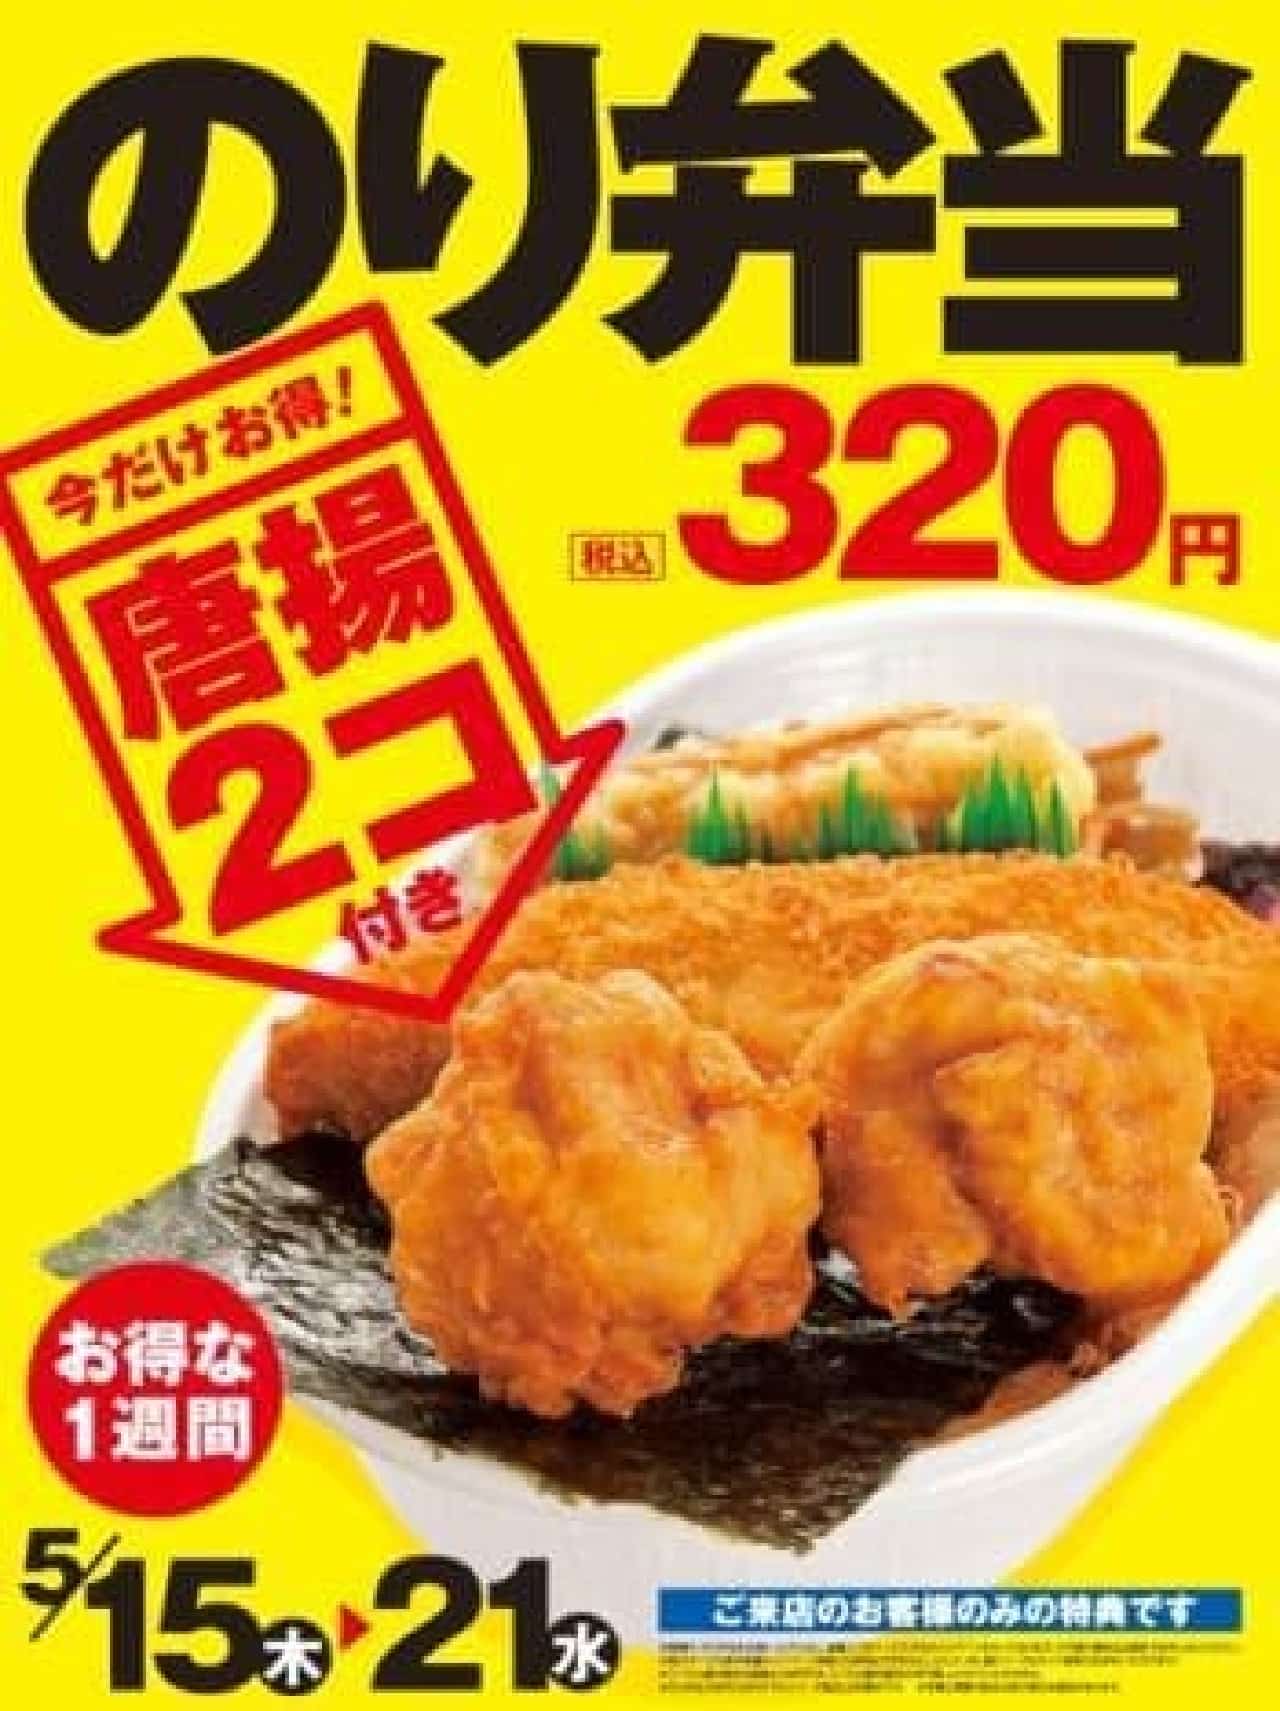 Only for now, two fried chicken will be attached to the "Noribento"!